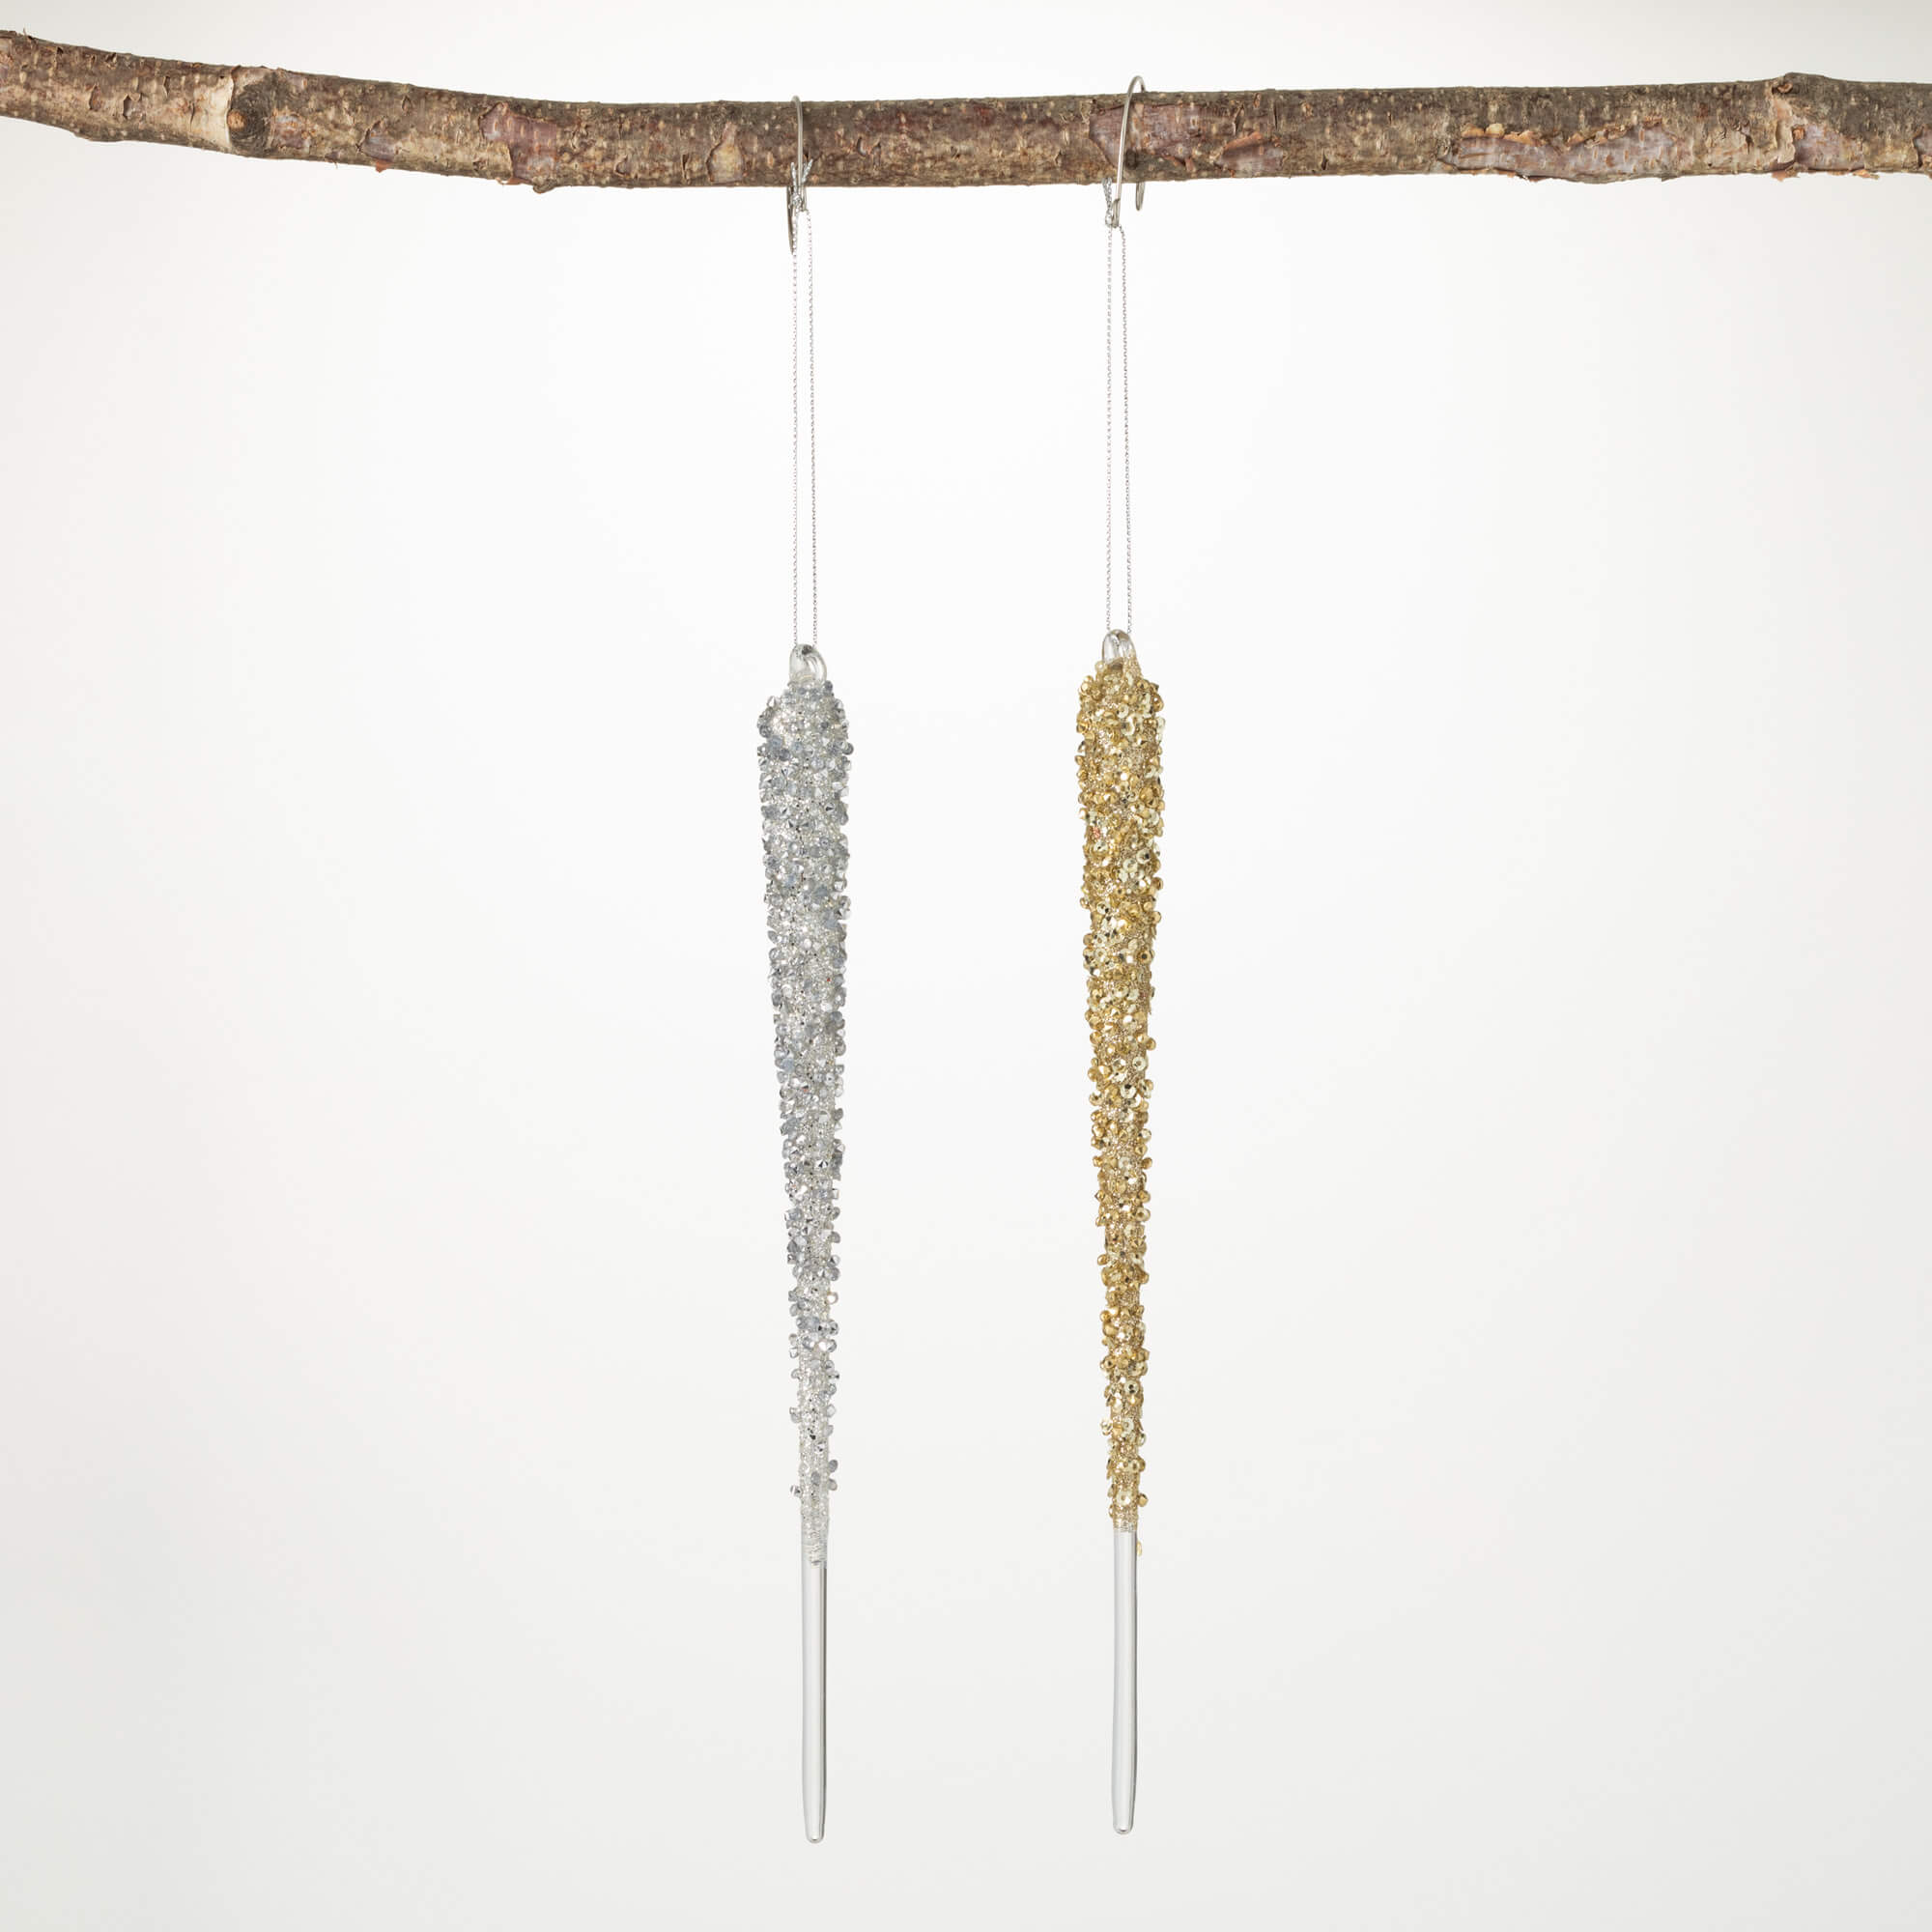 ICICLE ORNAMENT SET OF 2